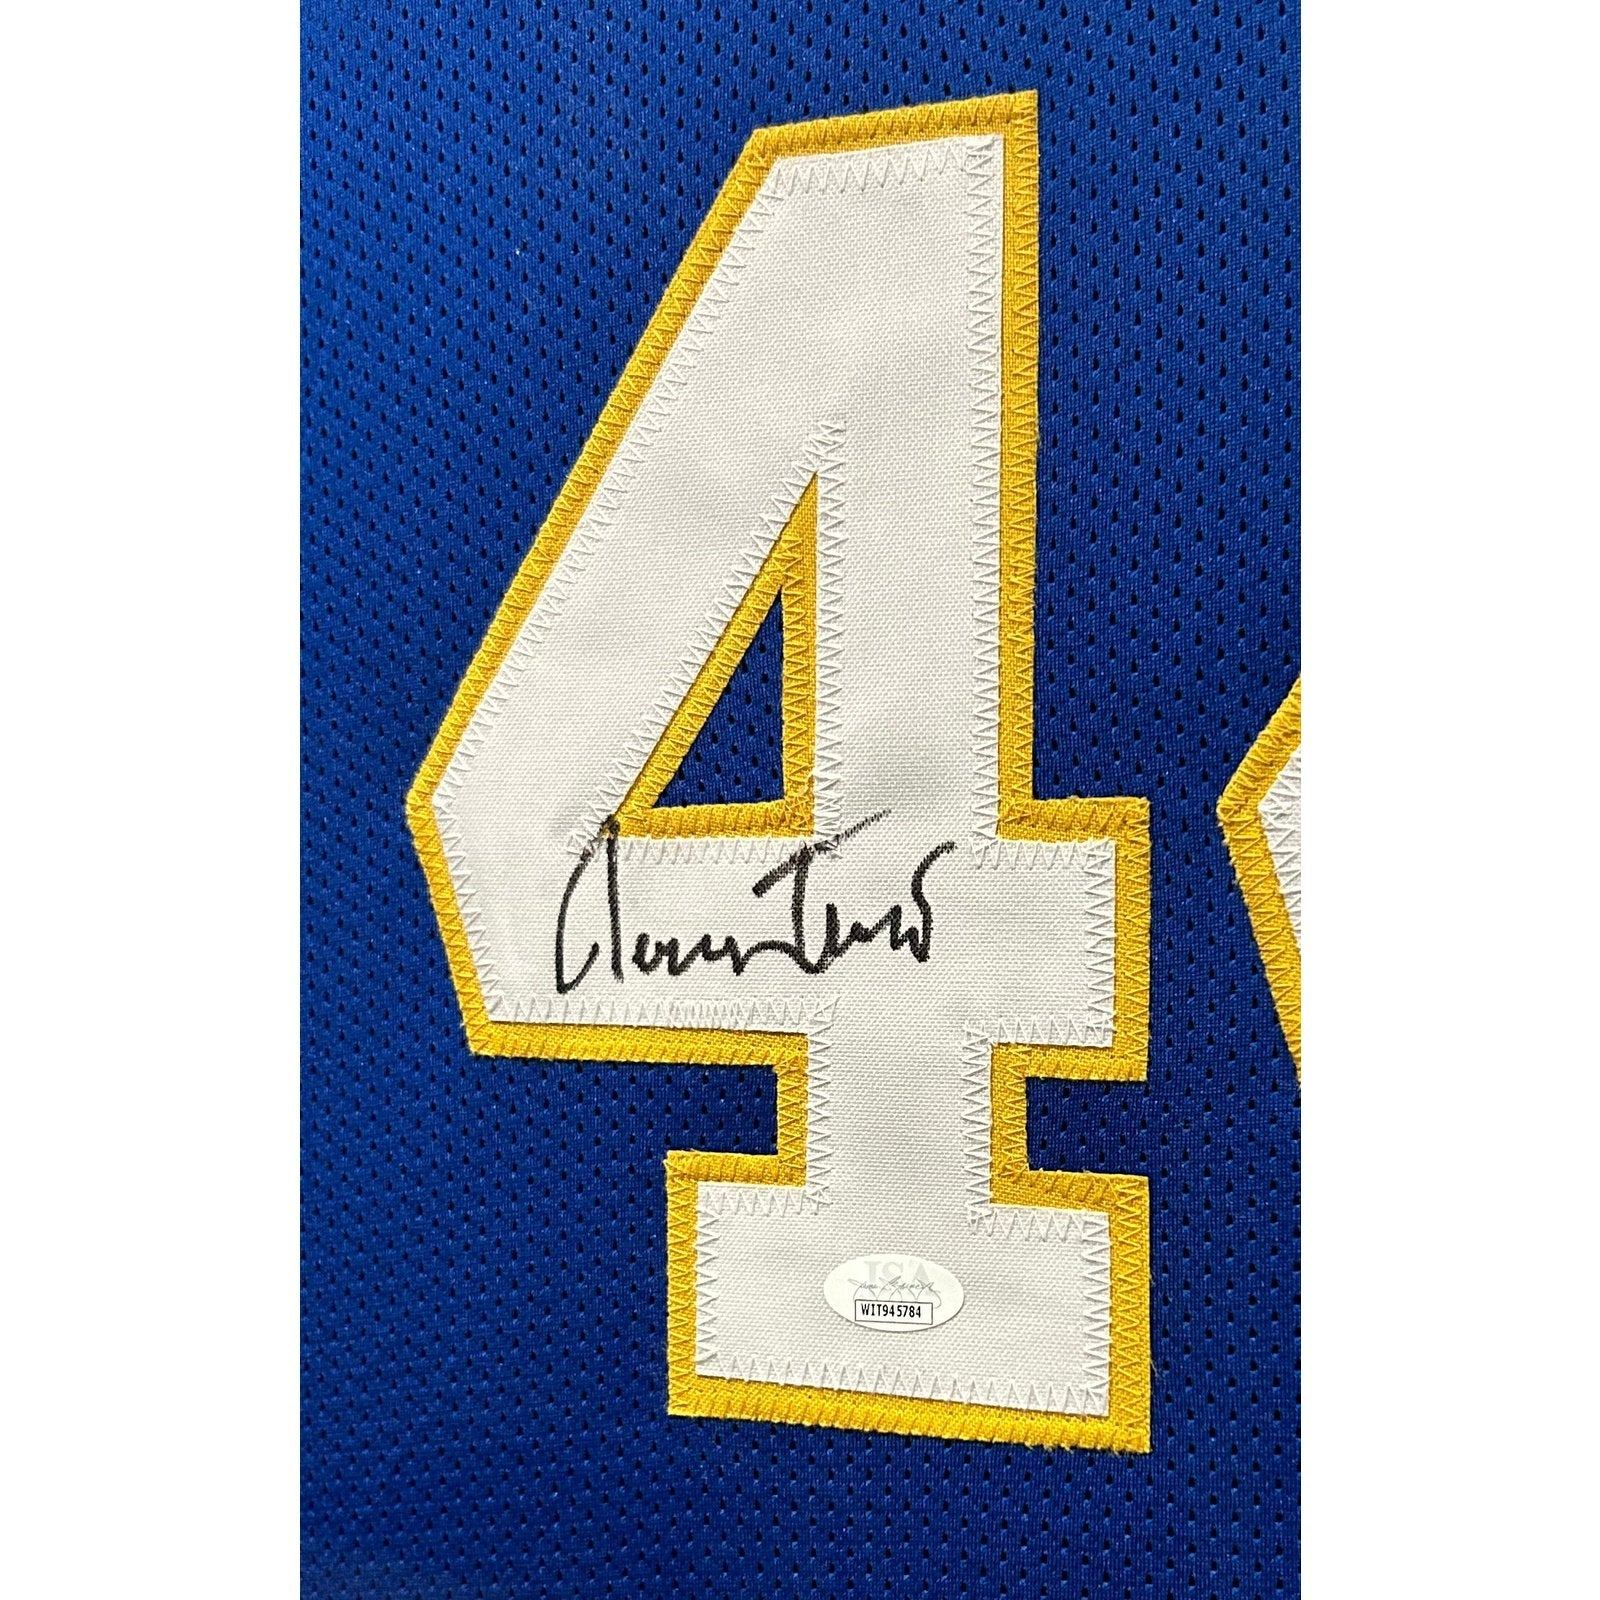 Jerry West Signed Framed Jersey JSA Autographed Los Angeles Lakers L.A.